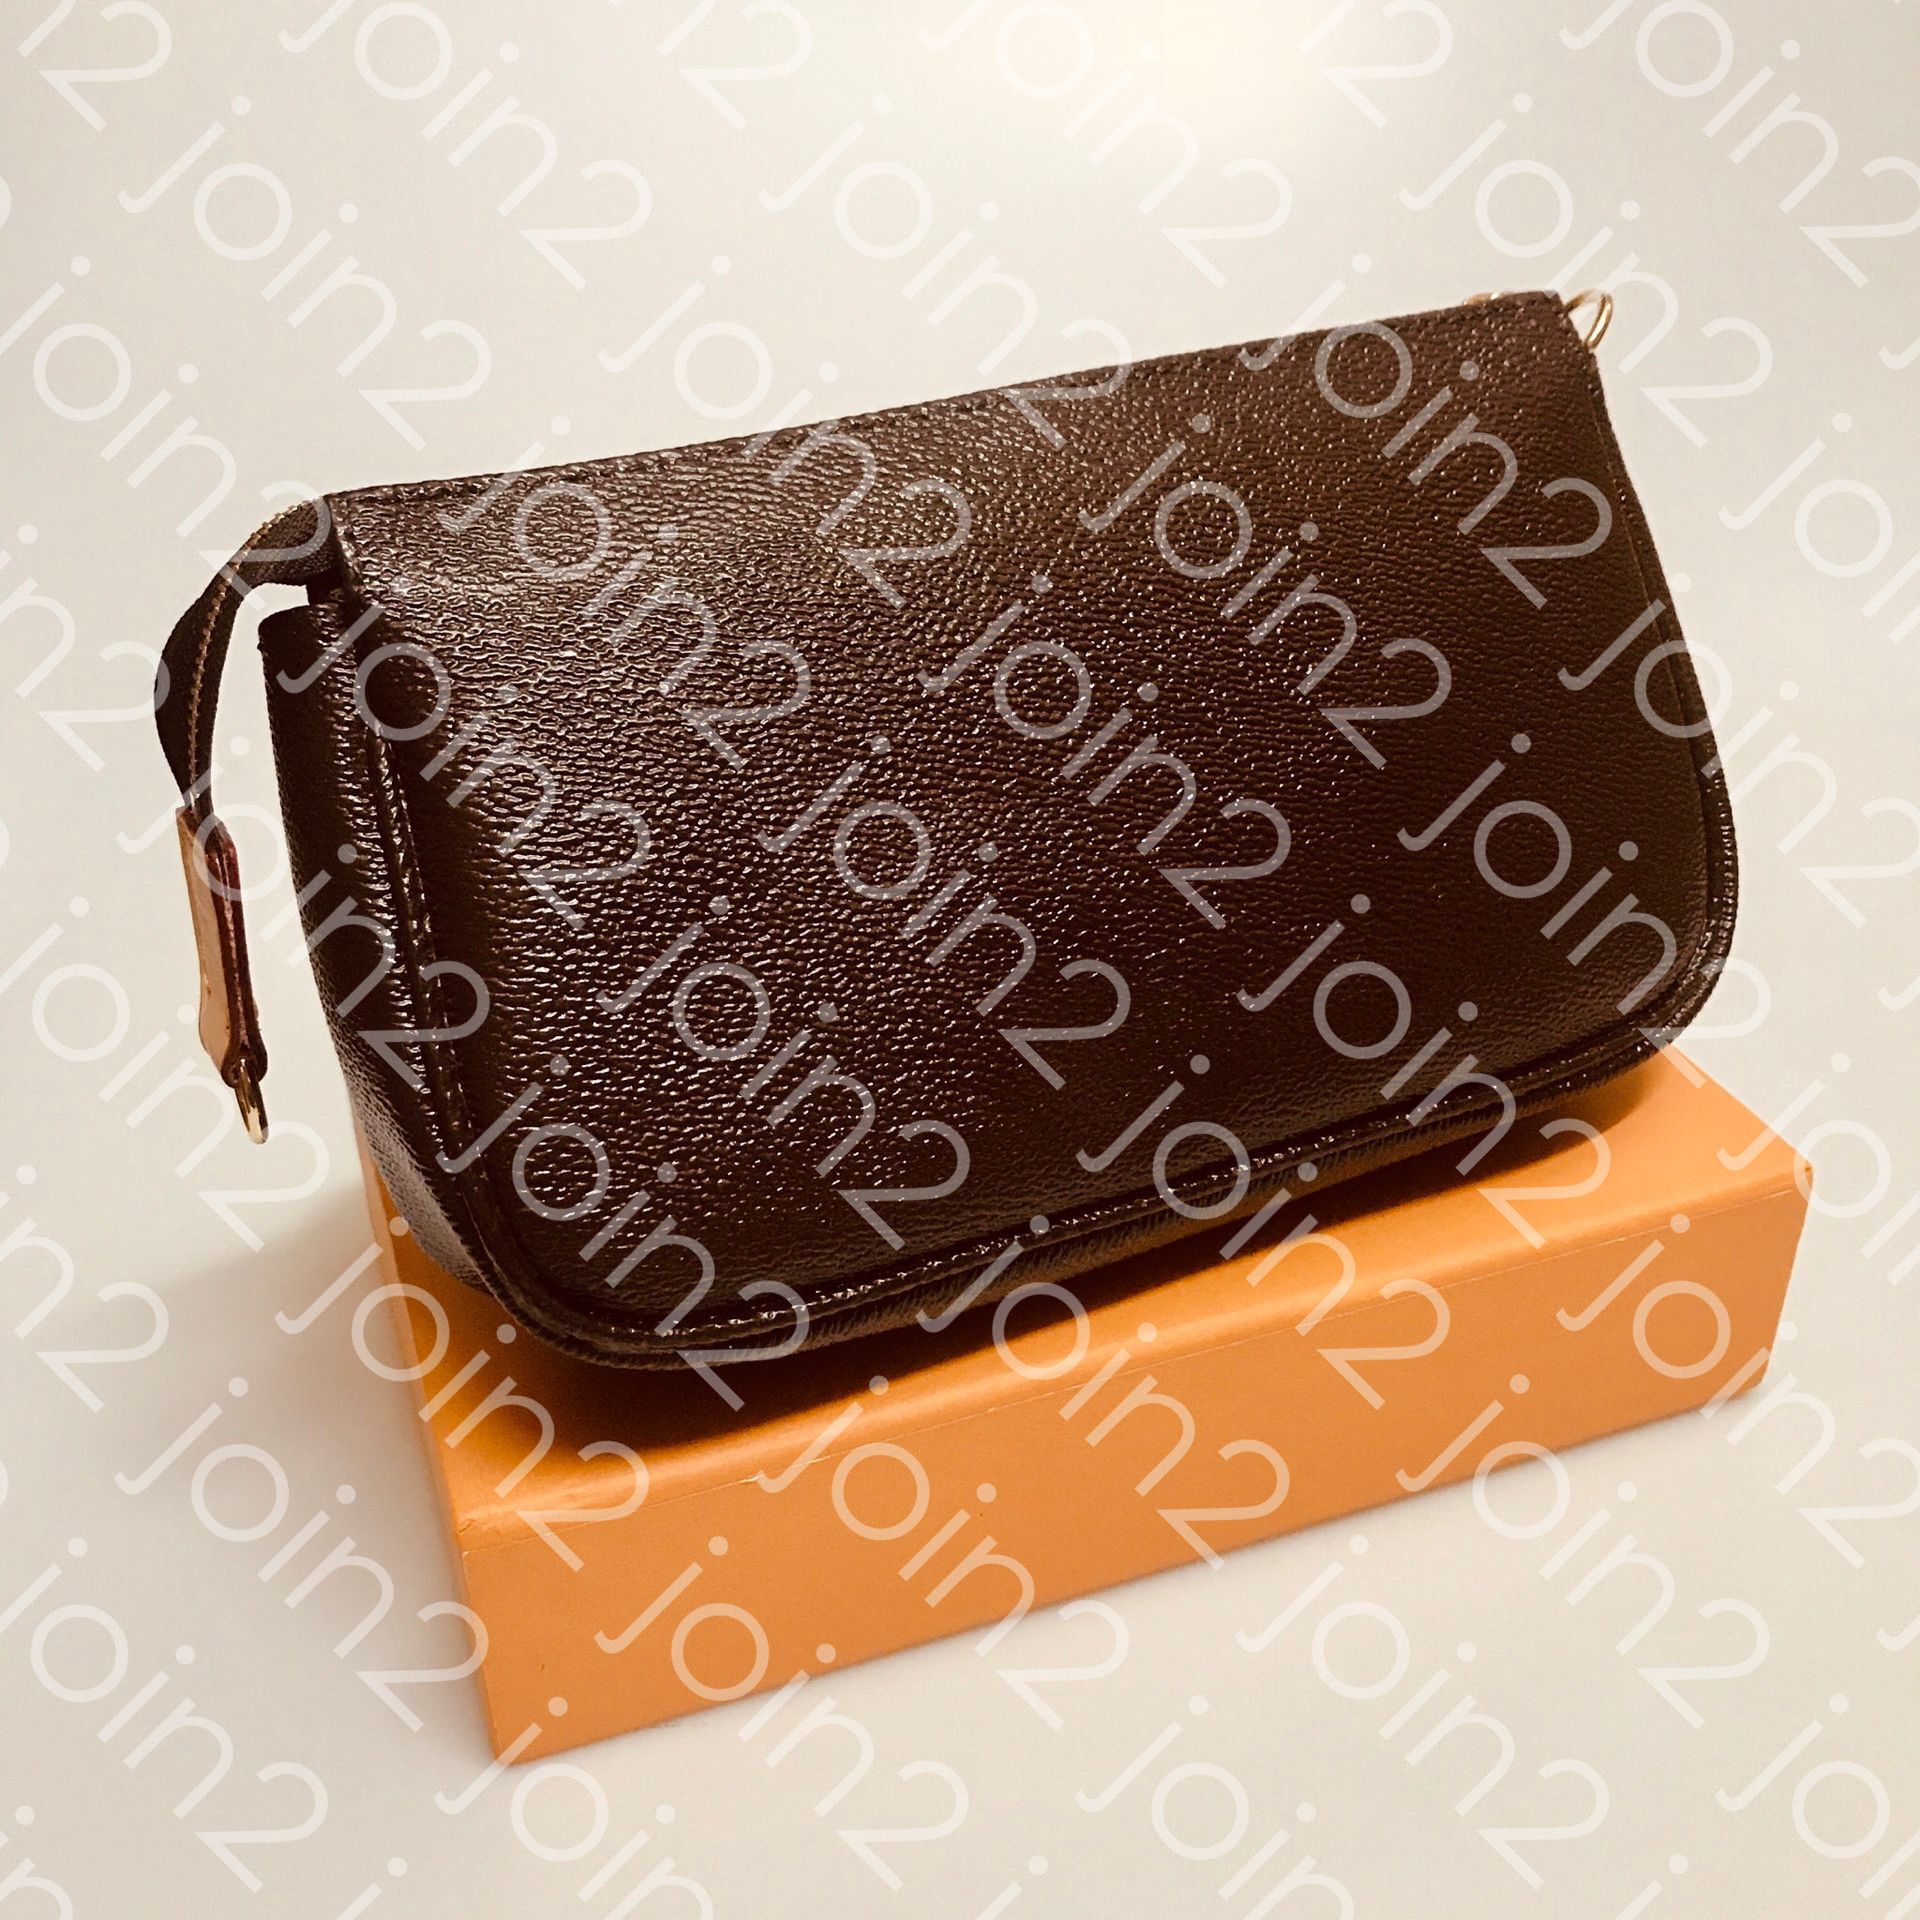 Anyone know where I can find a good quality Louis Vuitton Pochette  Accessoires (Monogram Canvas) handbag, from a trusted seller, like this one  please? : r/DHgate